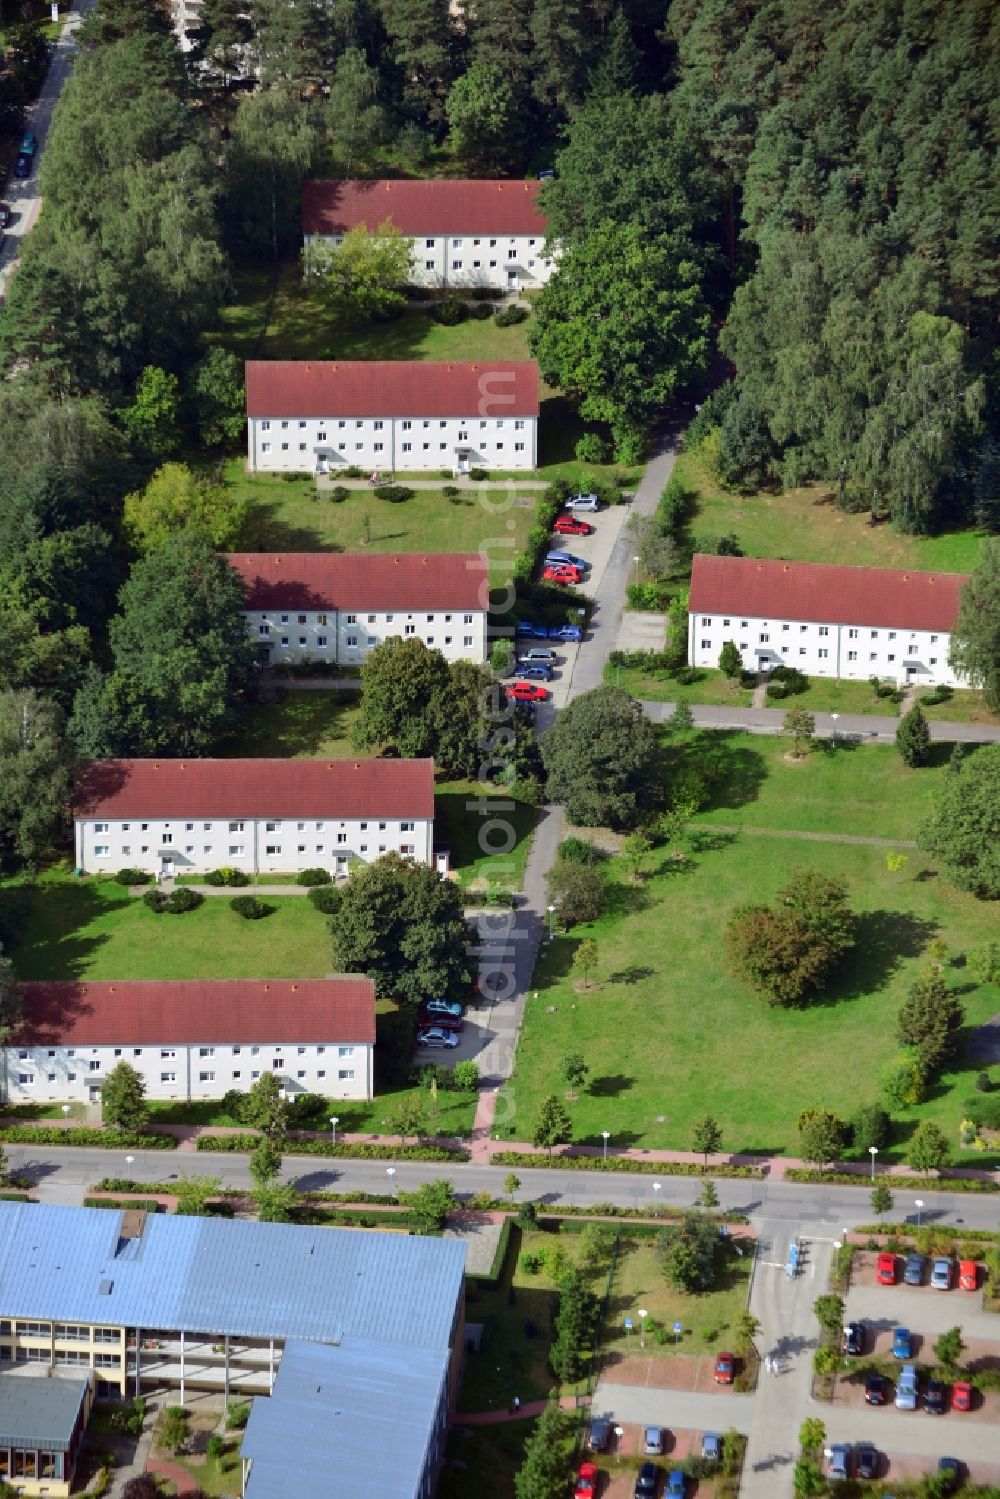 Bernau from the bird's eye view: View the clinic Brandenburg Bernau Waldfrieden on the grounds of the former residential area of the GDR government forest village near Bernau in Brandenburg under the leadership of Michel's Hospital Berlin-Brandenburg. Here to see residential buildings on the site